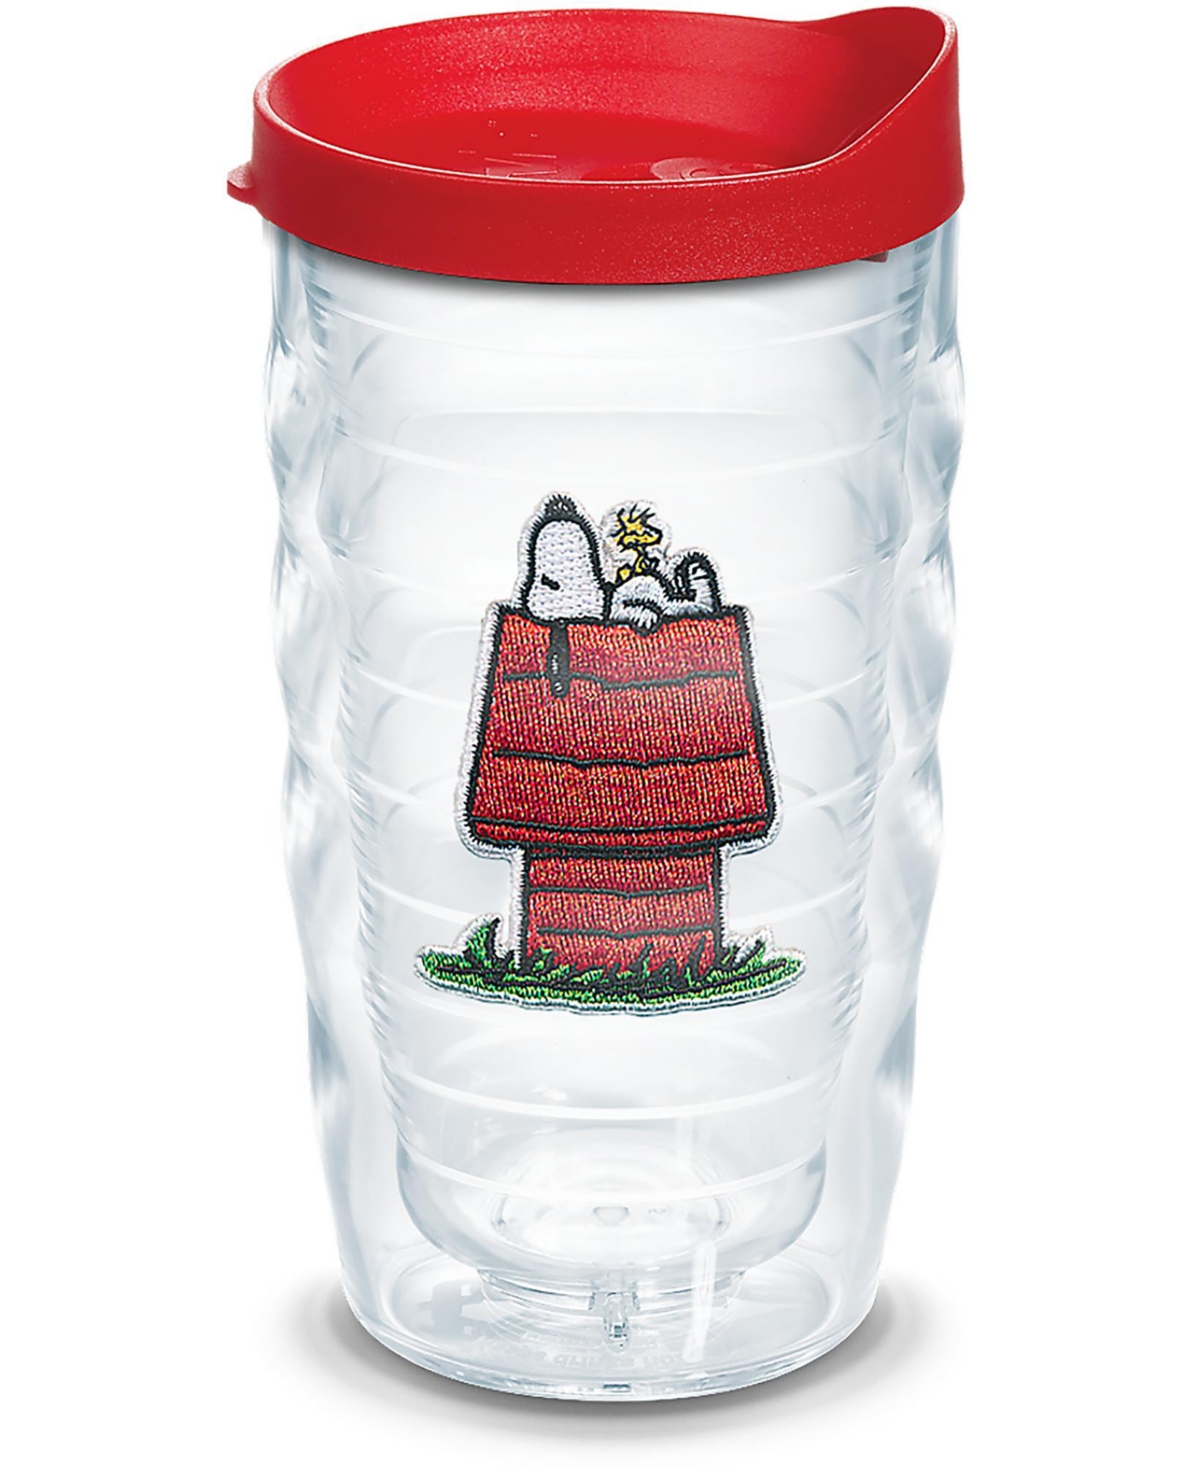 Tervis Tumbler Tervis Peanuts - Snoopy Woodstock House Made In Usa Double Walled Insulated Tumbler Travel Cup Keeps In Open Miscellaneous